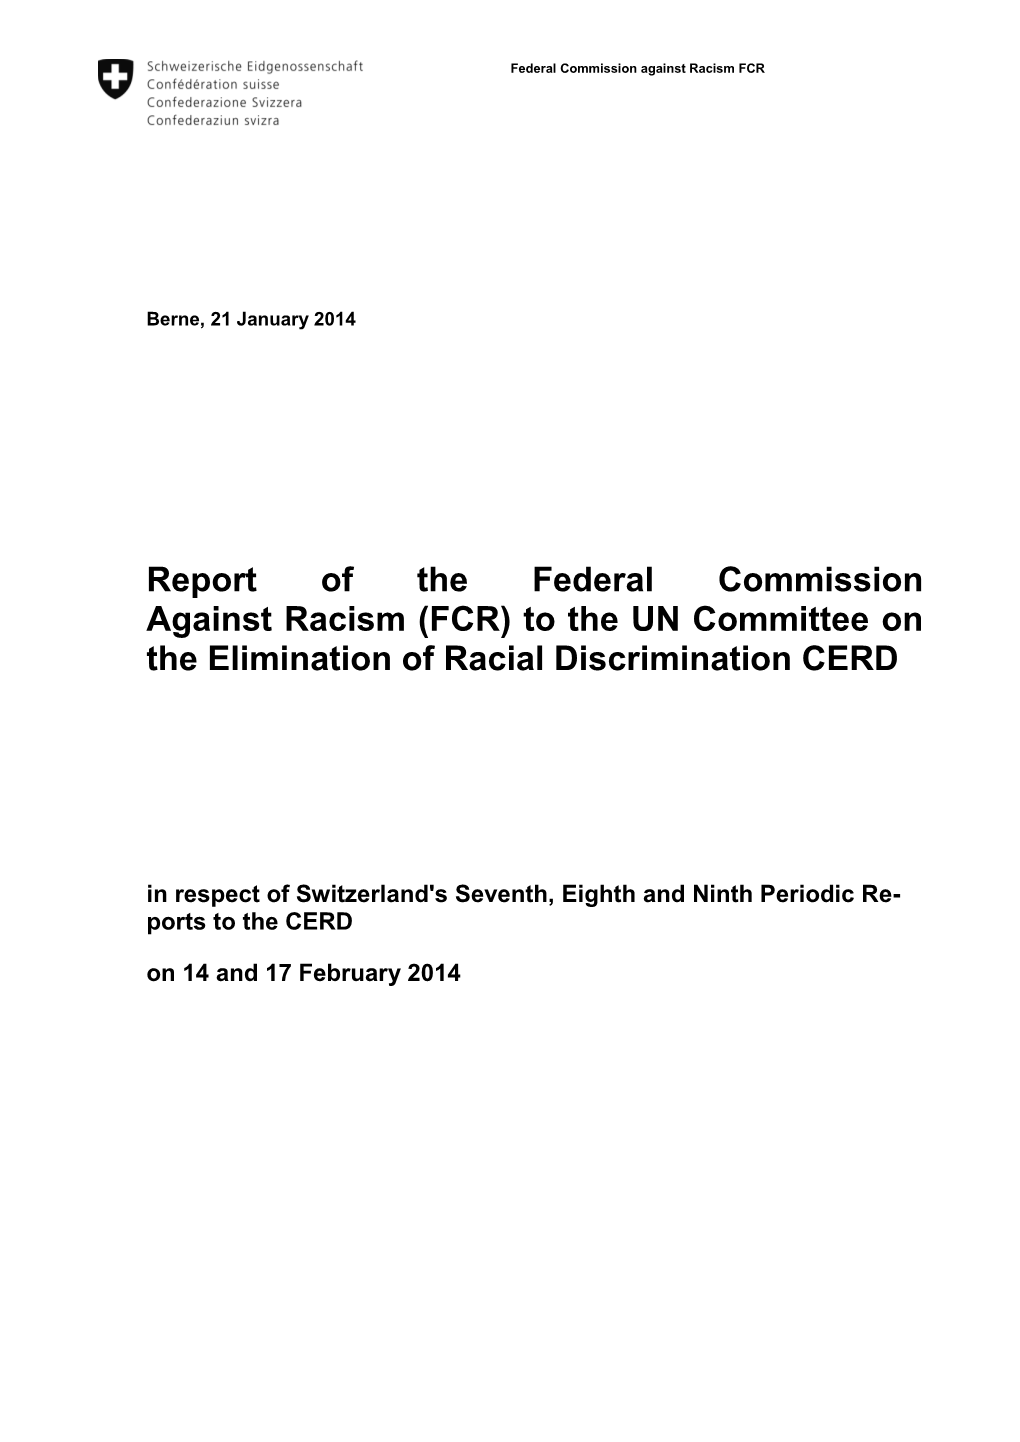 Report of the Federal Commission Against Racism (FCR) to the UN Committee on the Elimination of Racial Discrimination CERD